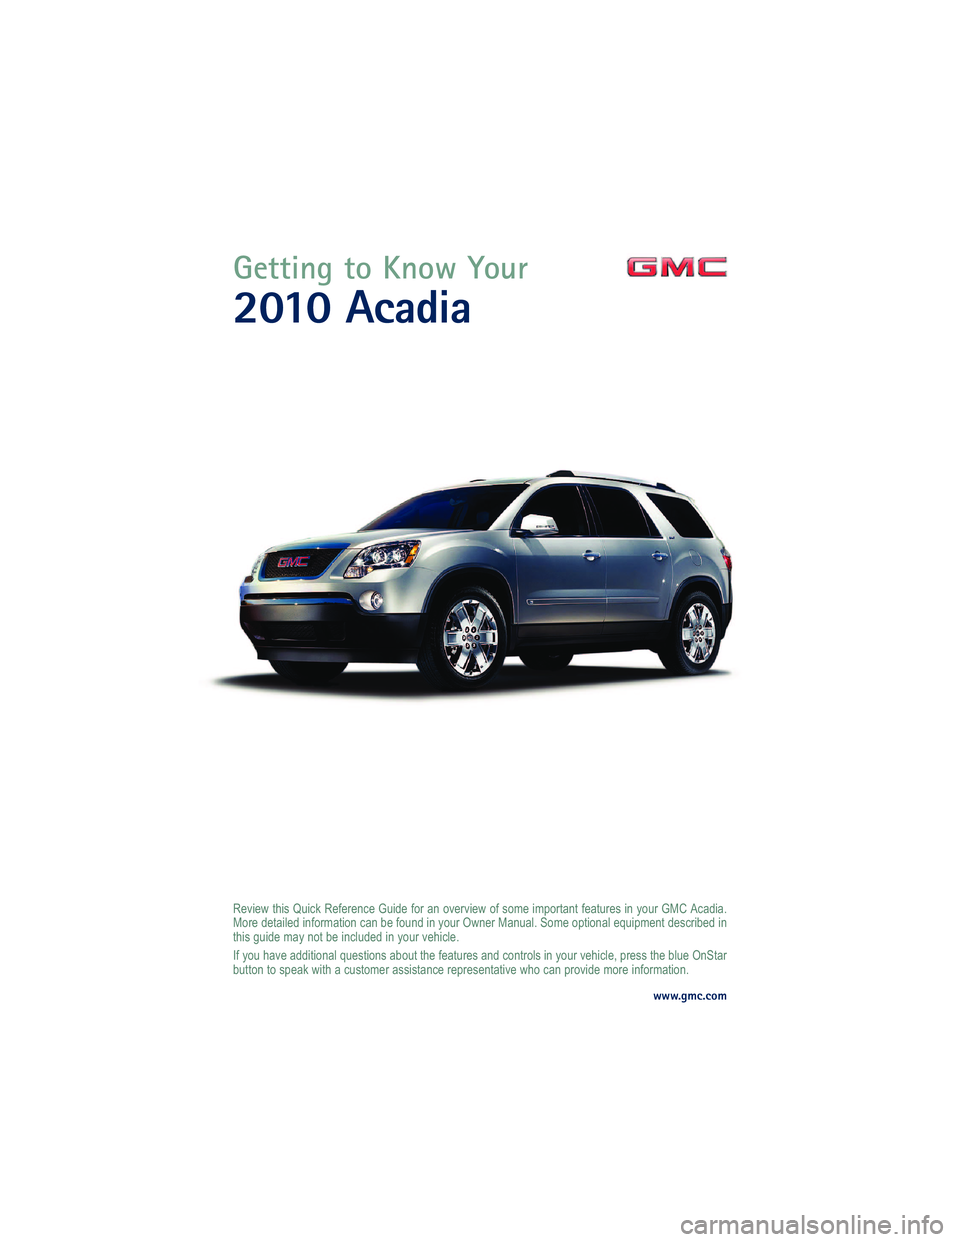 GMC ACADIA 2010  Get To Know Guide 